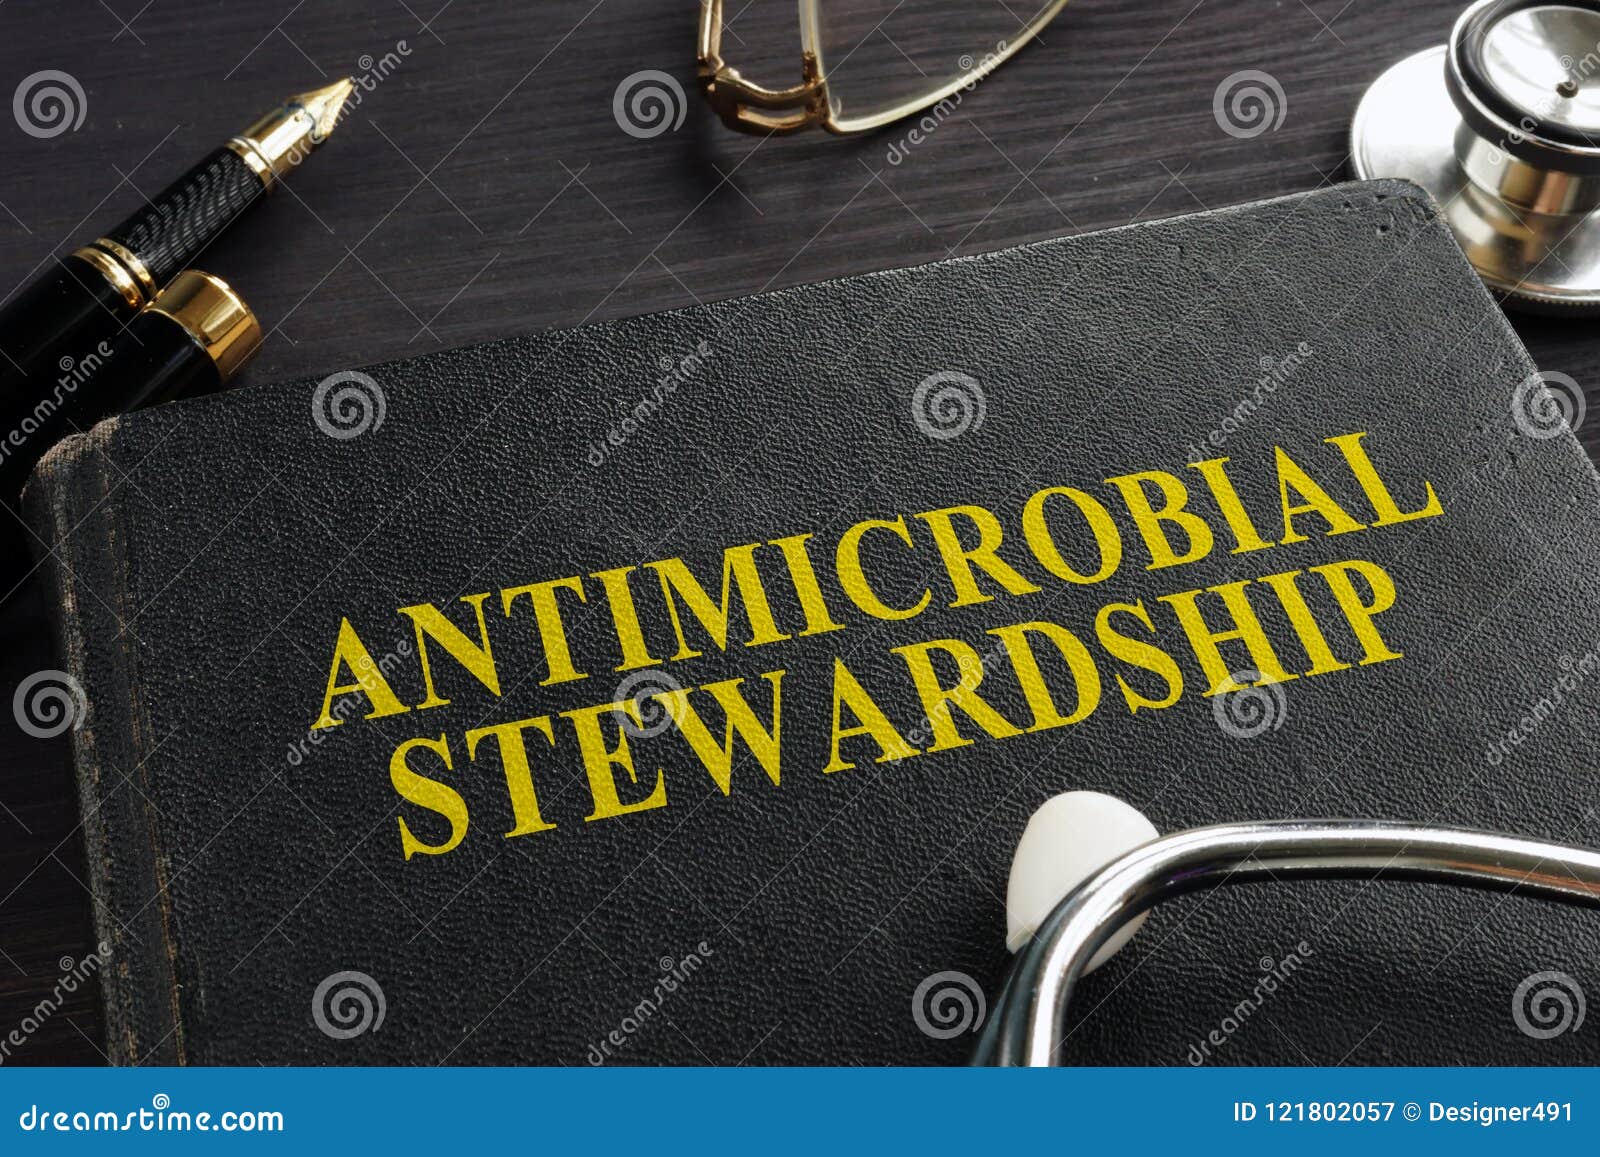 book about antimicrobial stewardship ams.